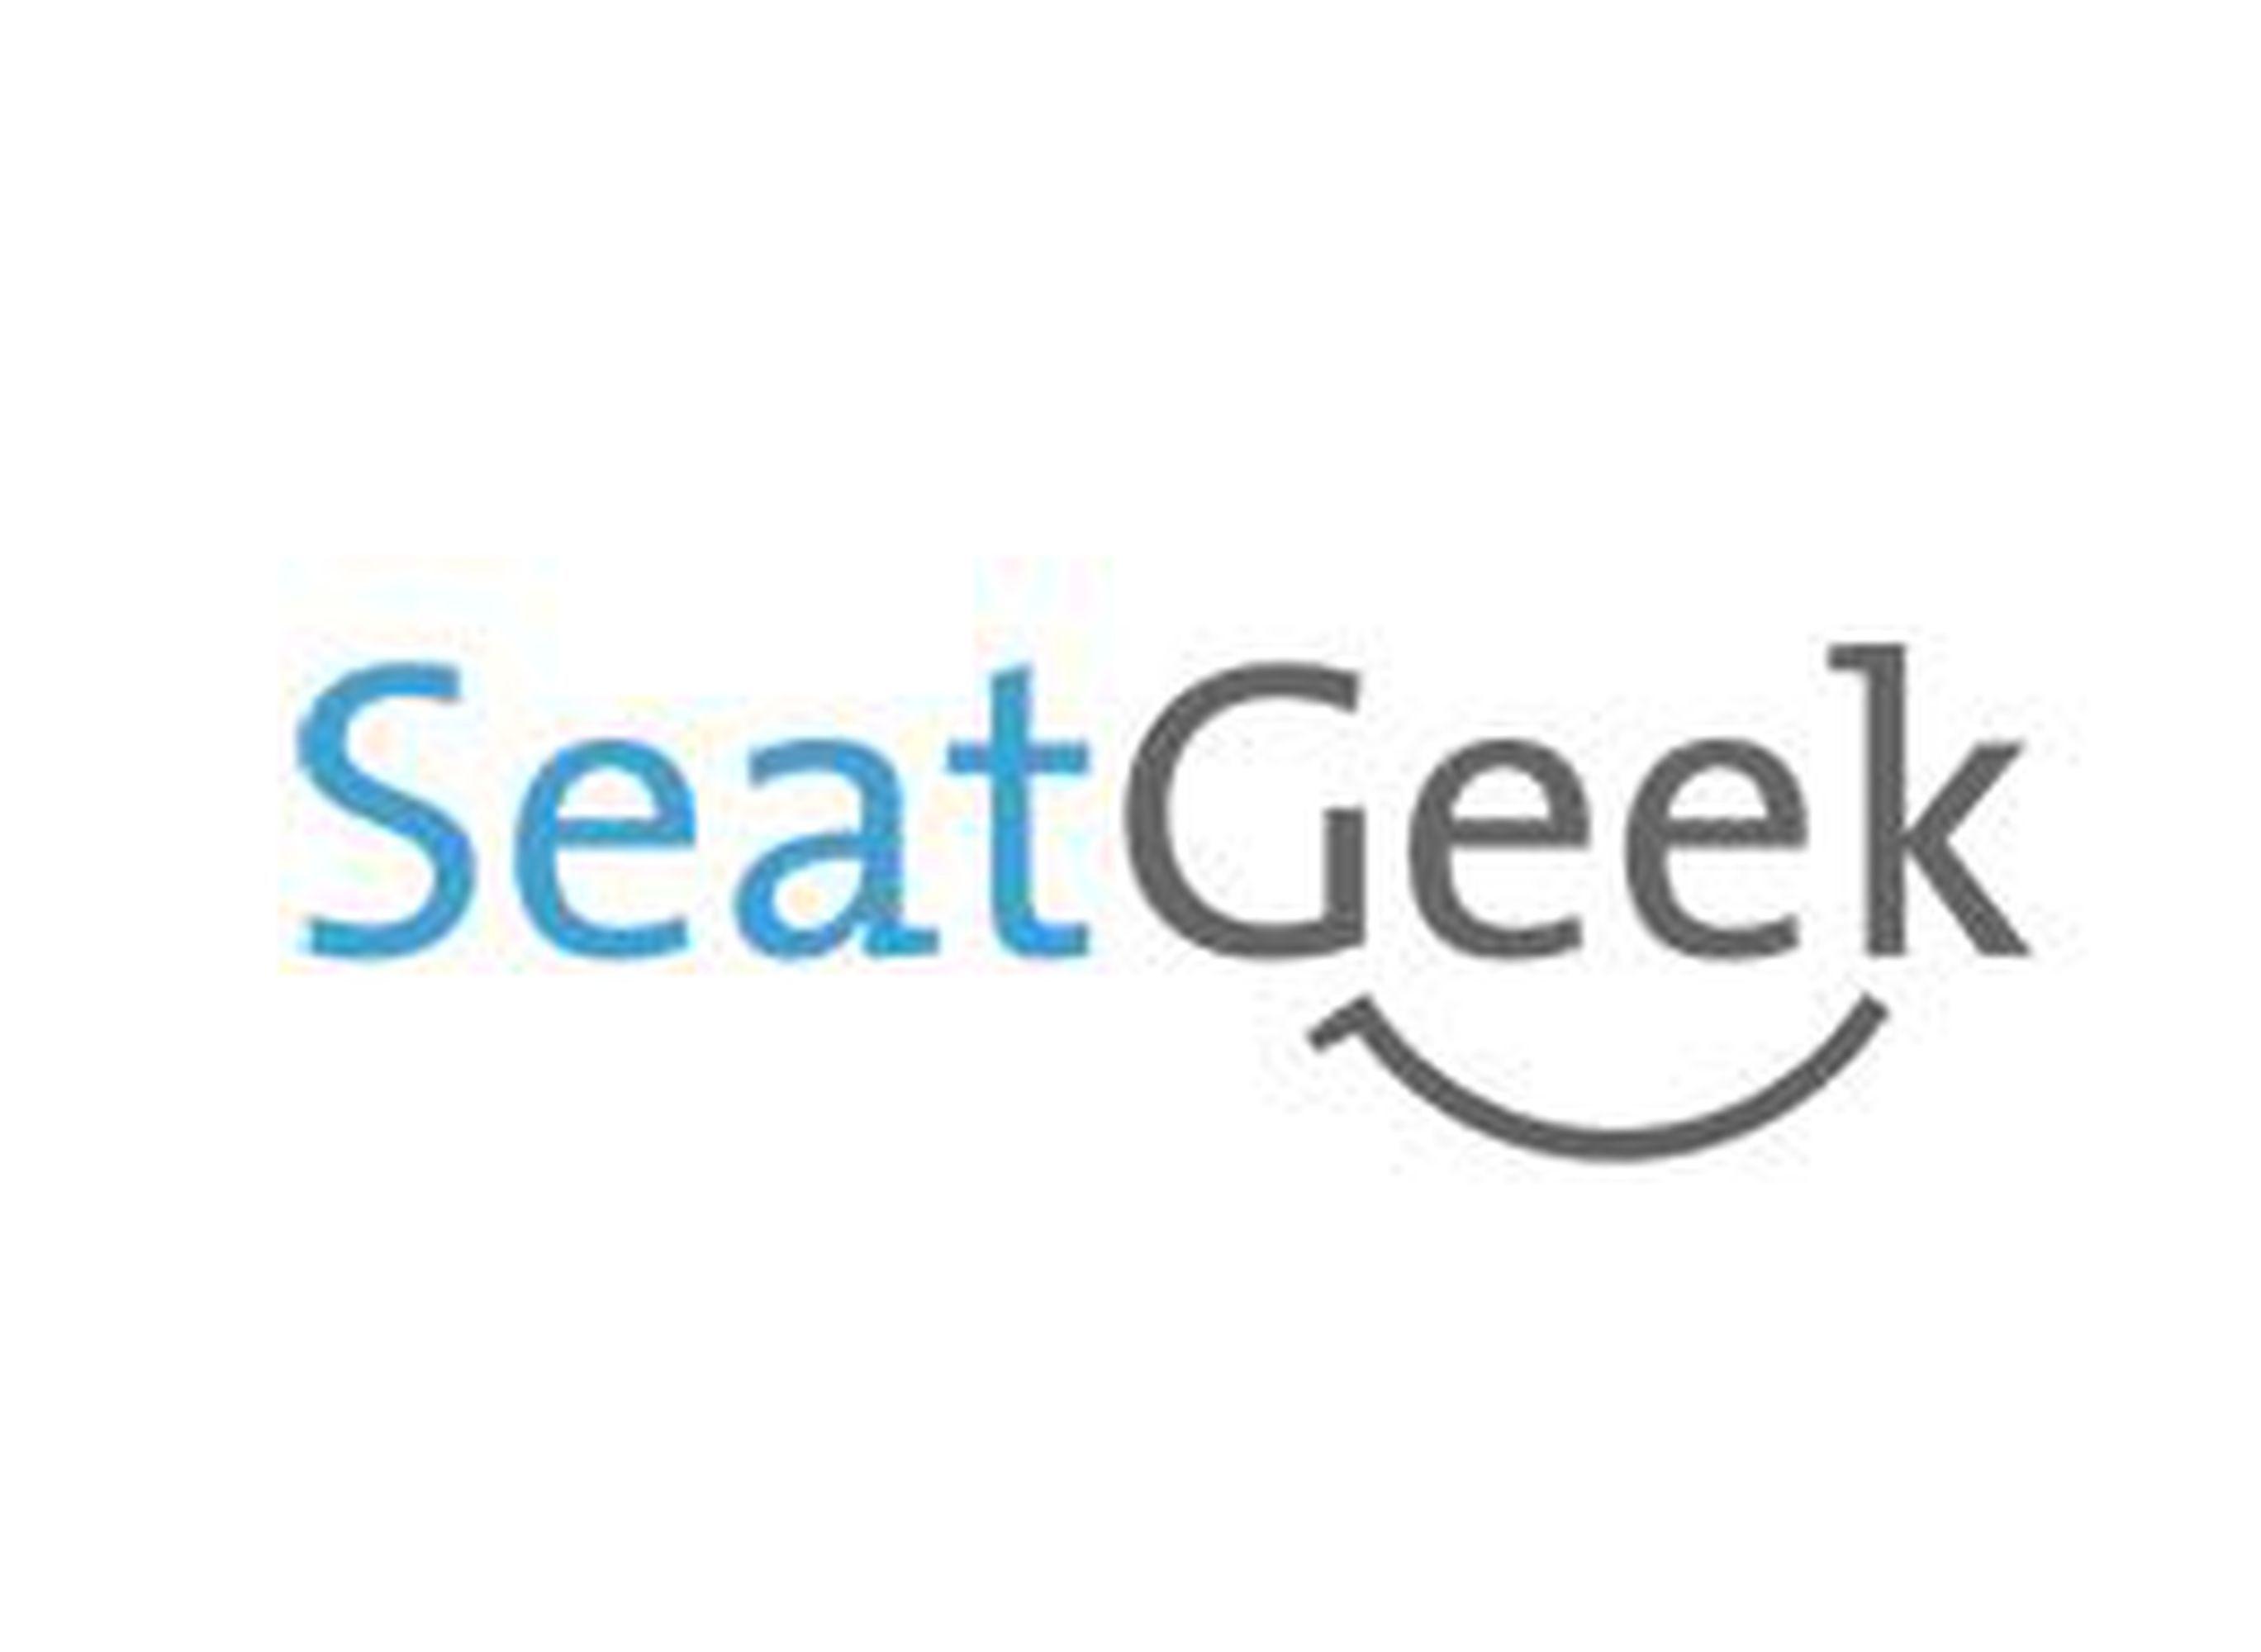 Seatgeek.com Logo - SeatGeek Predicts the Best Time to Buy Concert and Sports Tickets